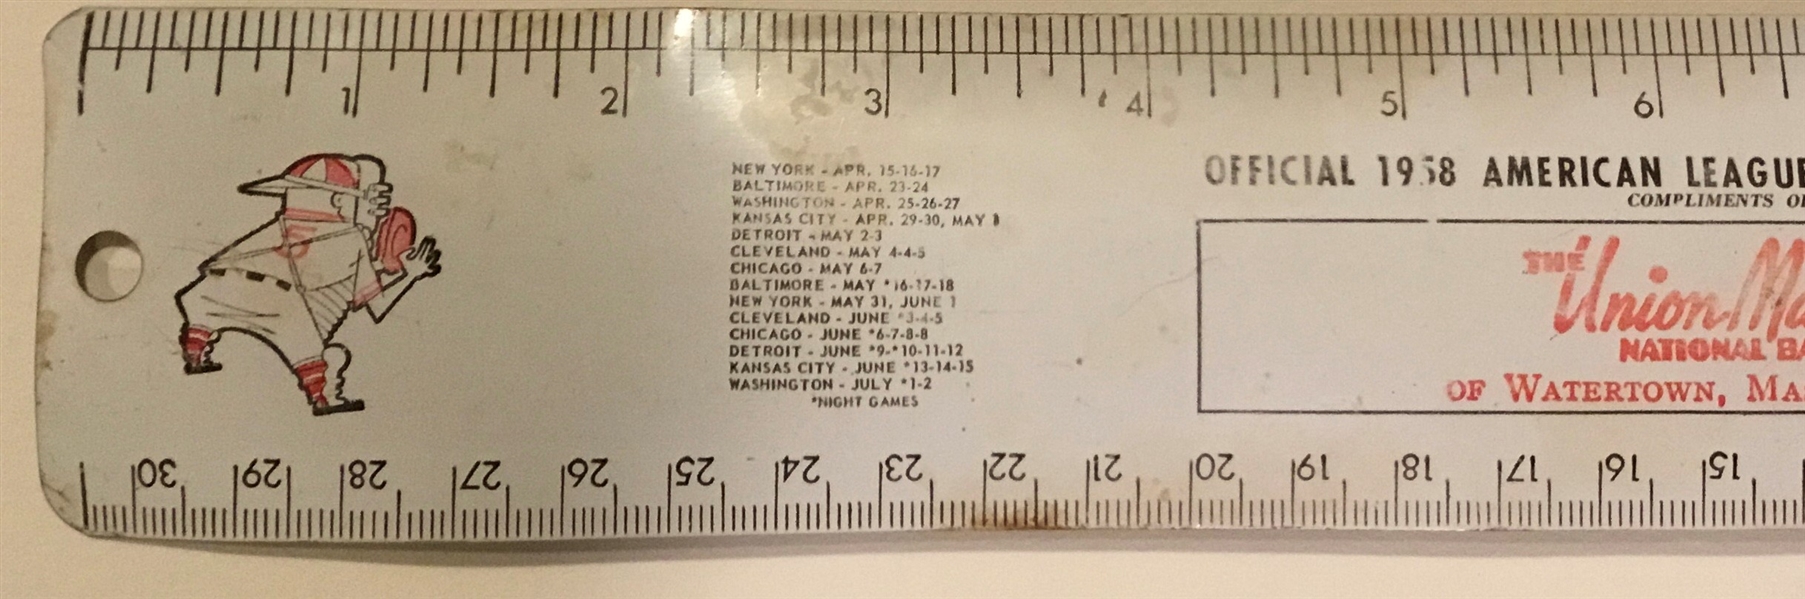 1958 BOSTON RED SOX SCHEDULE RULER